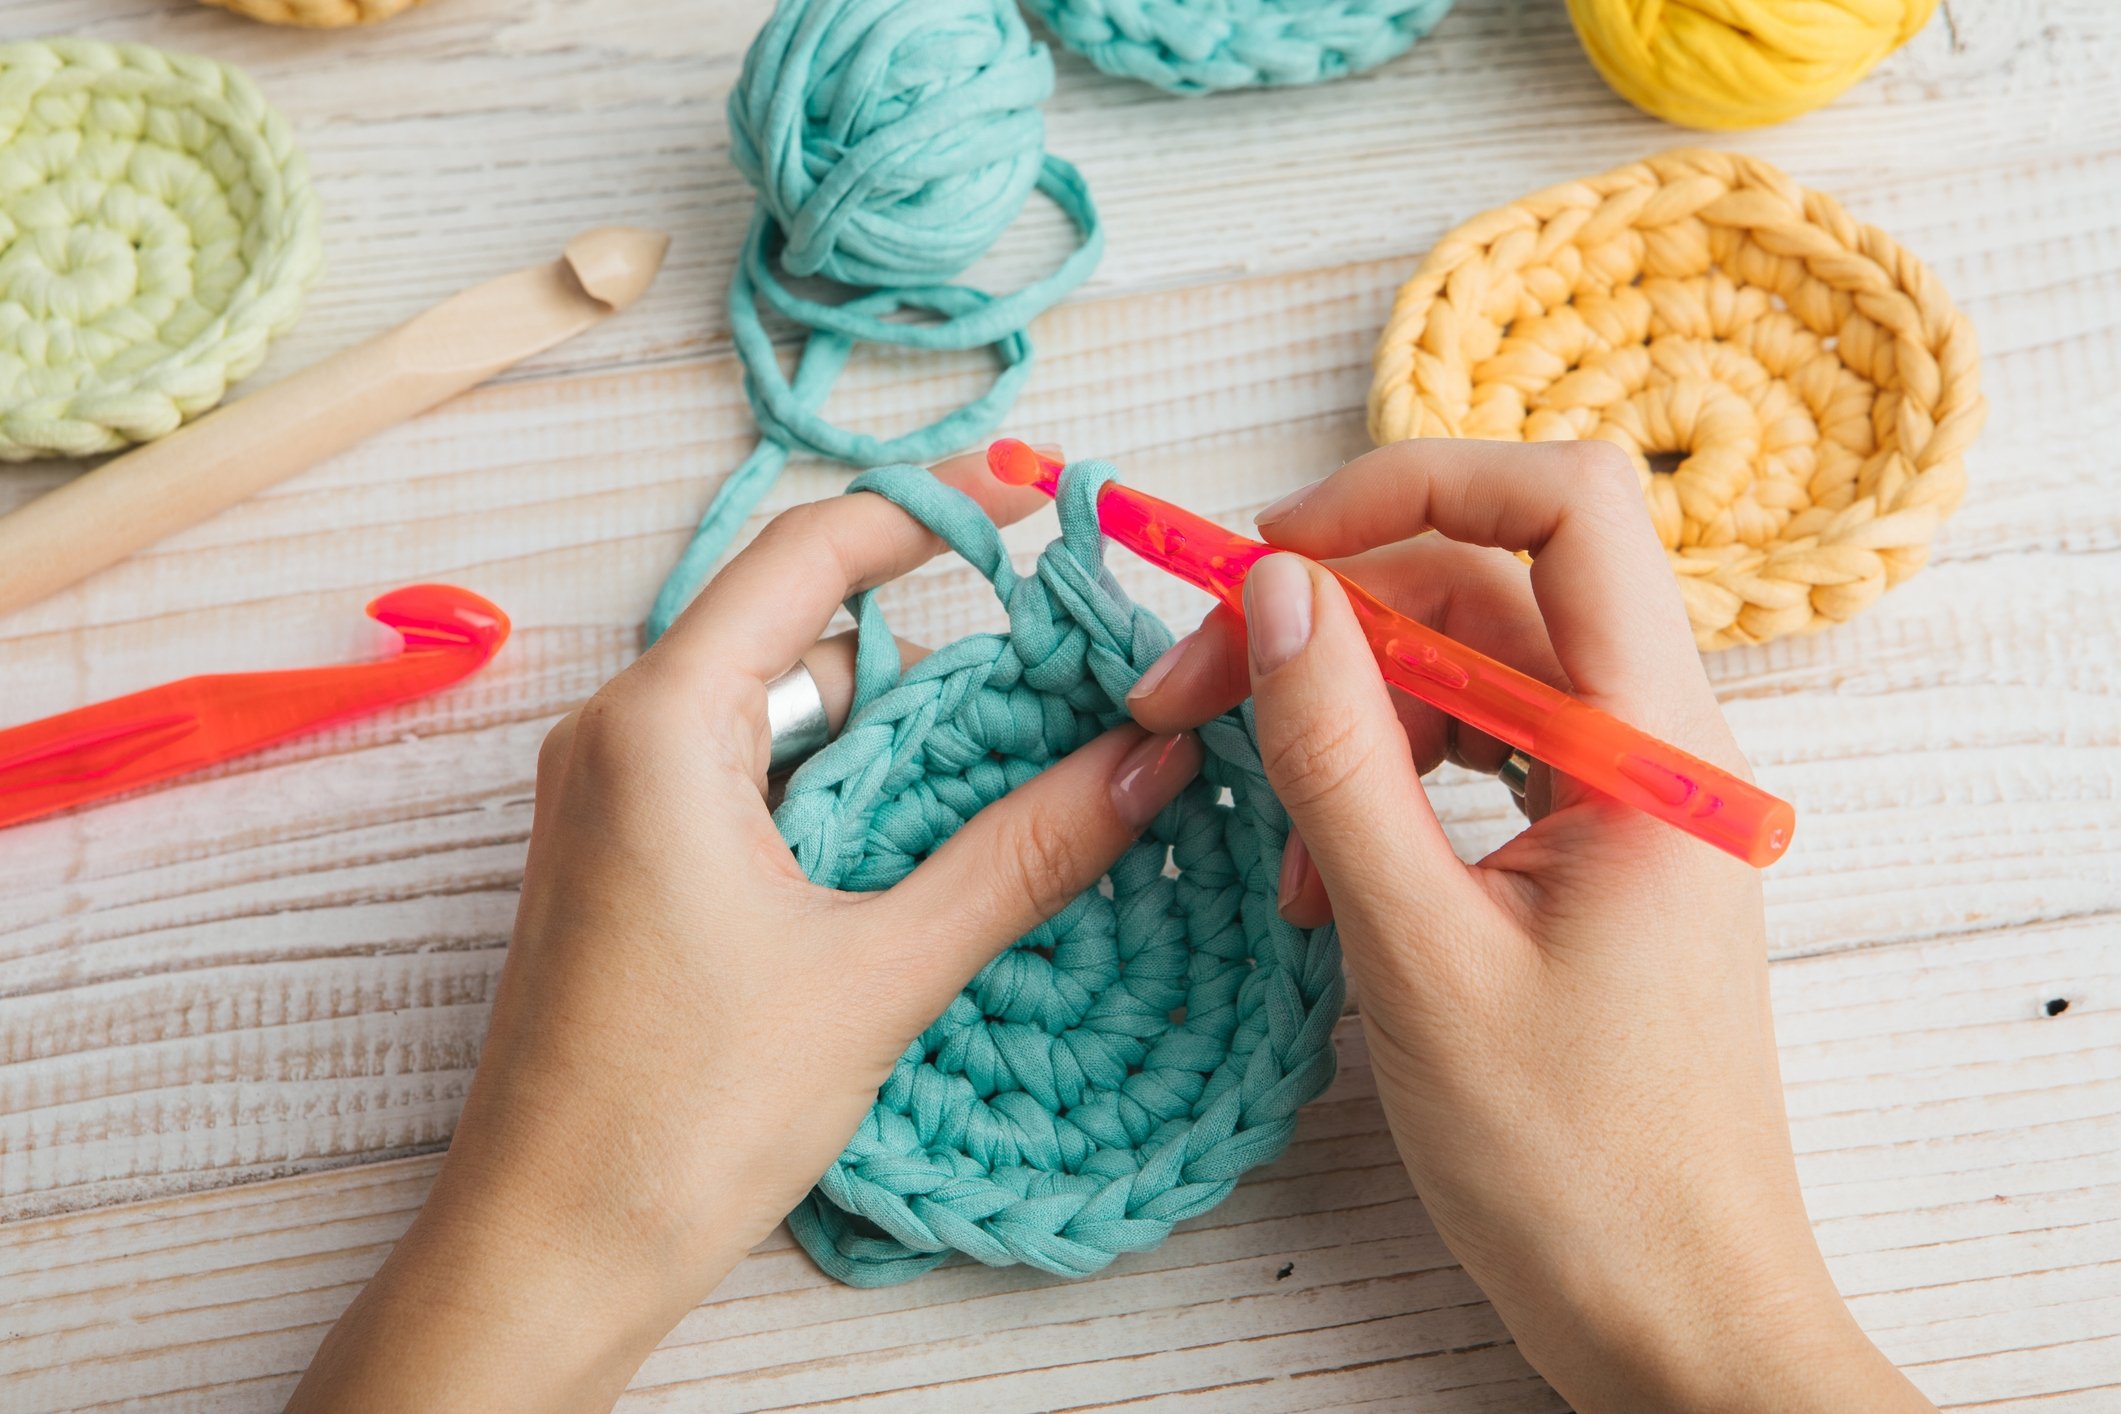 Can Knitting Yarn Be Used For Crochet? 